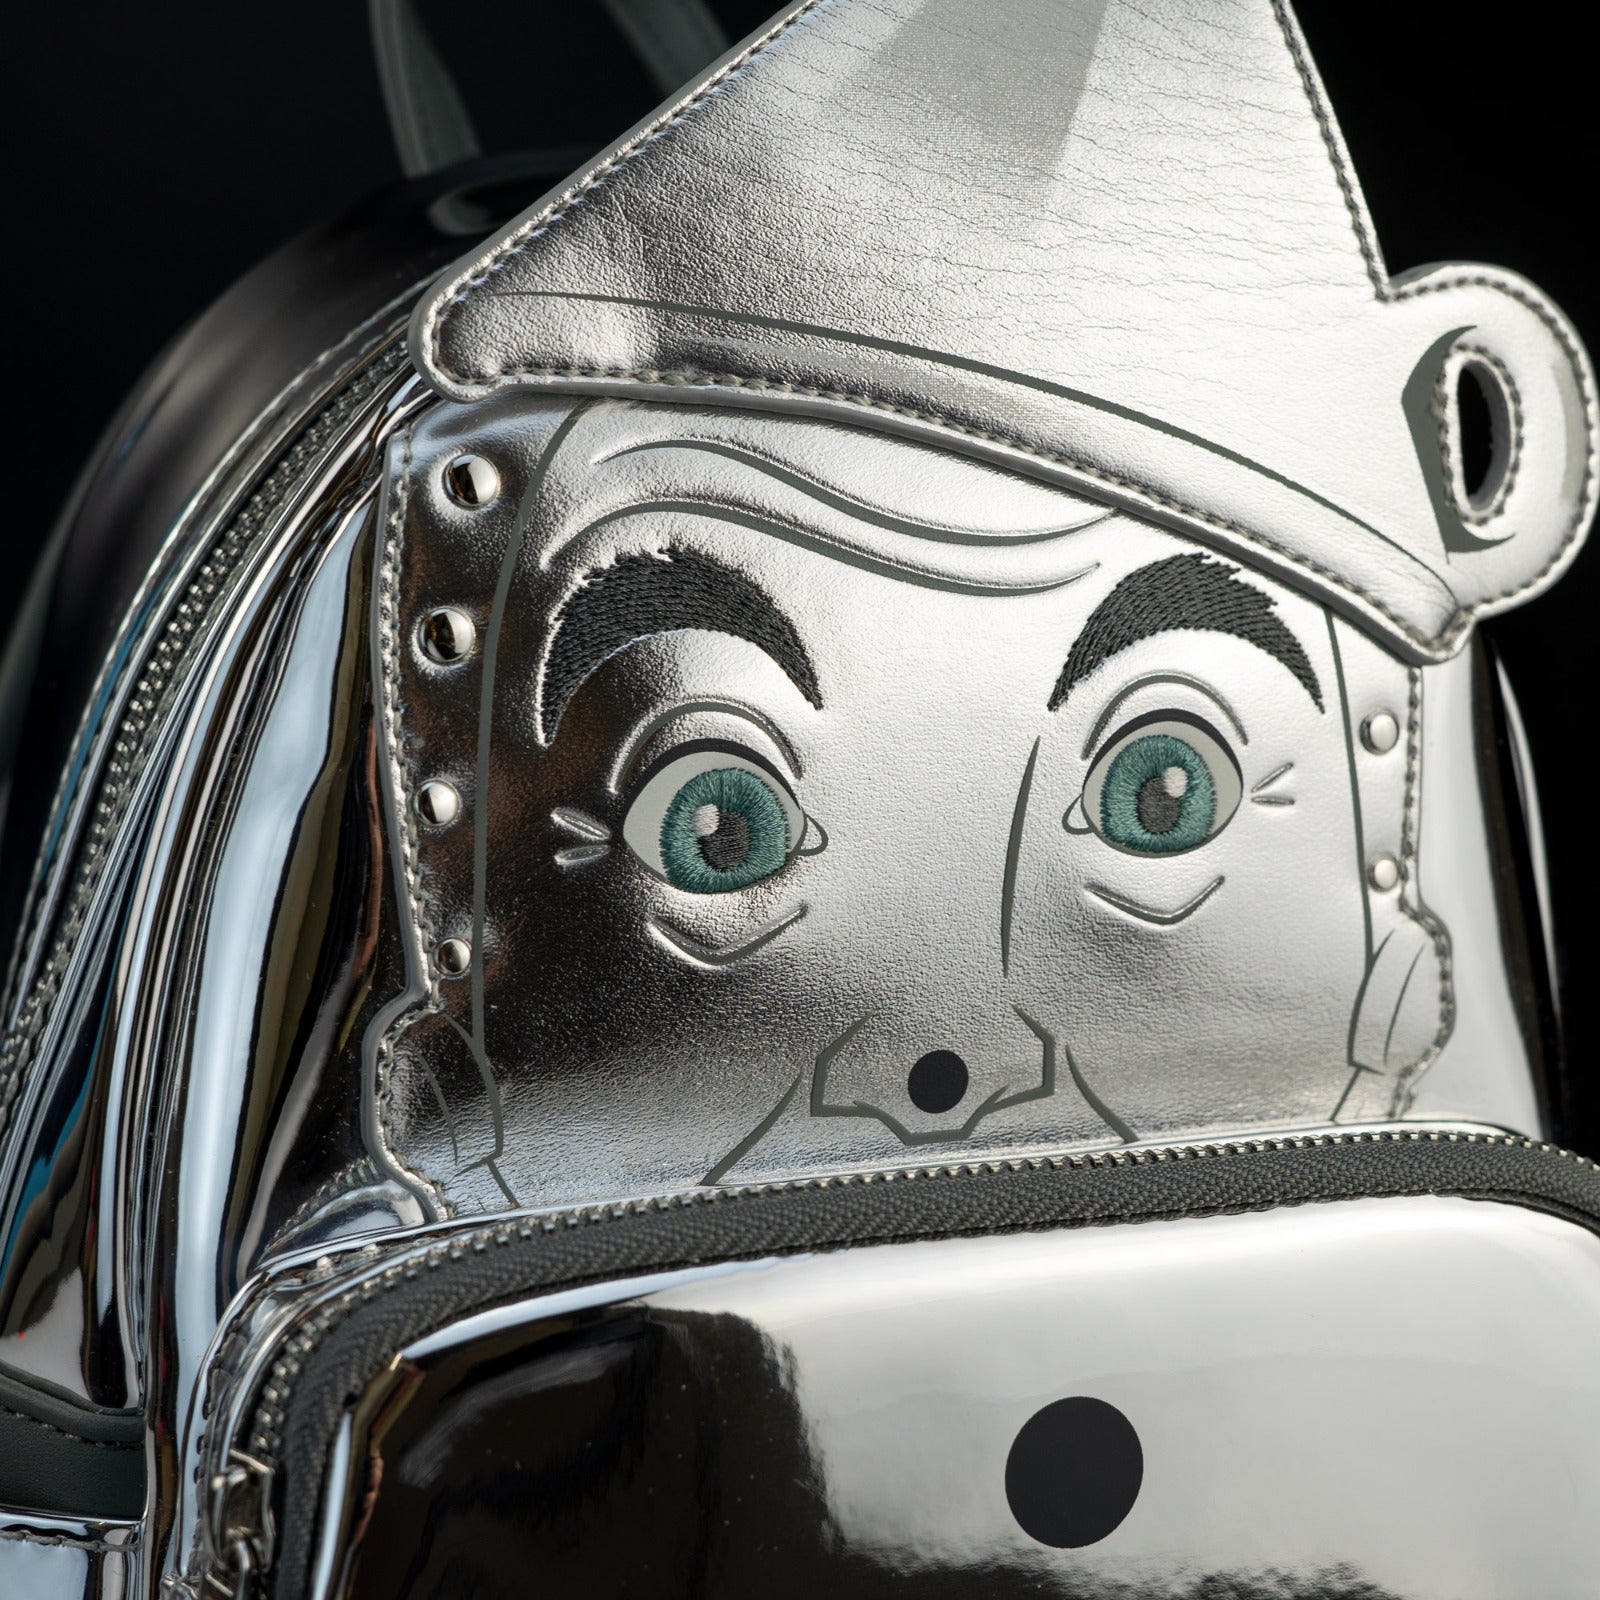 Loungefly x The Wizard of Oz The Tin Man Cosplay Mini Backpack